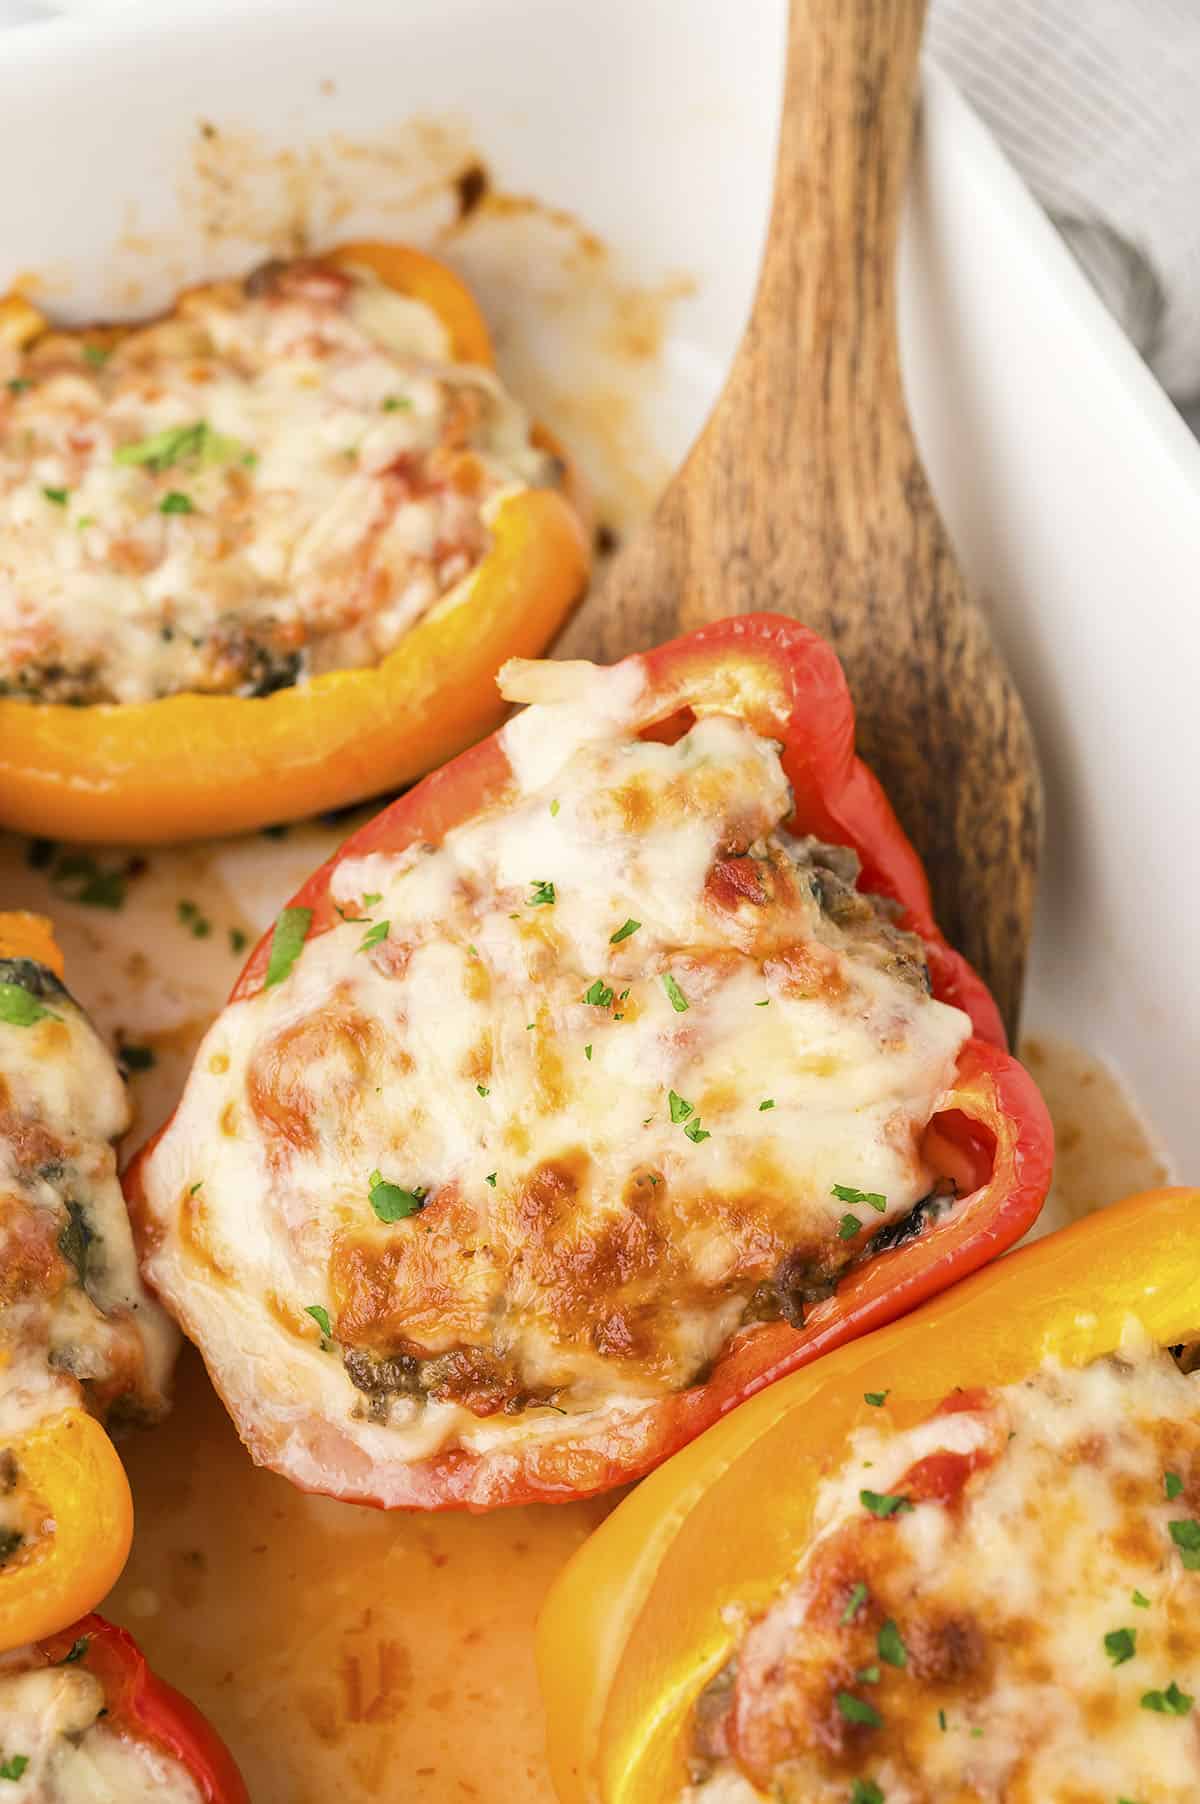 Keto stuffed pepper in baking dish with wooden spoon.